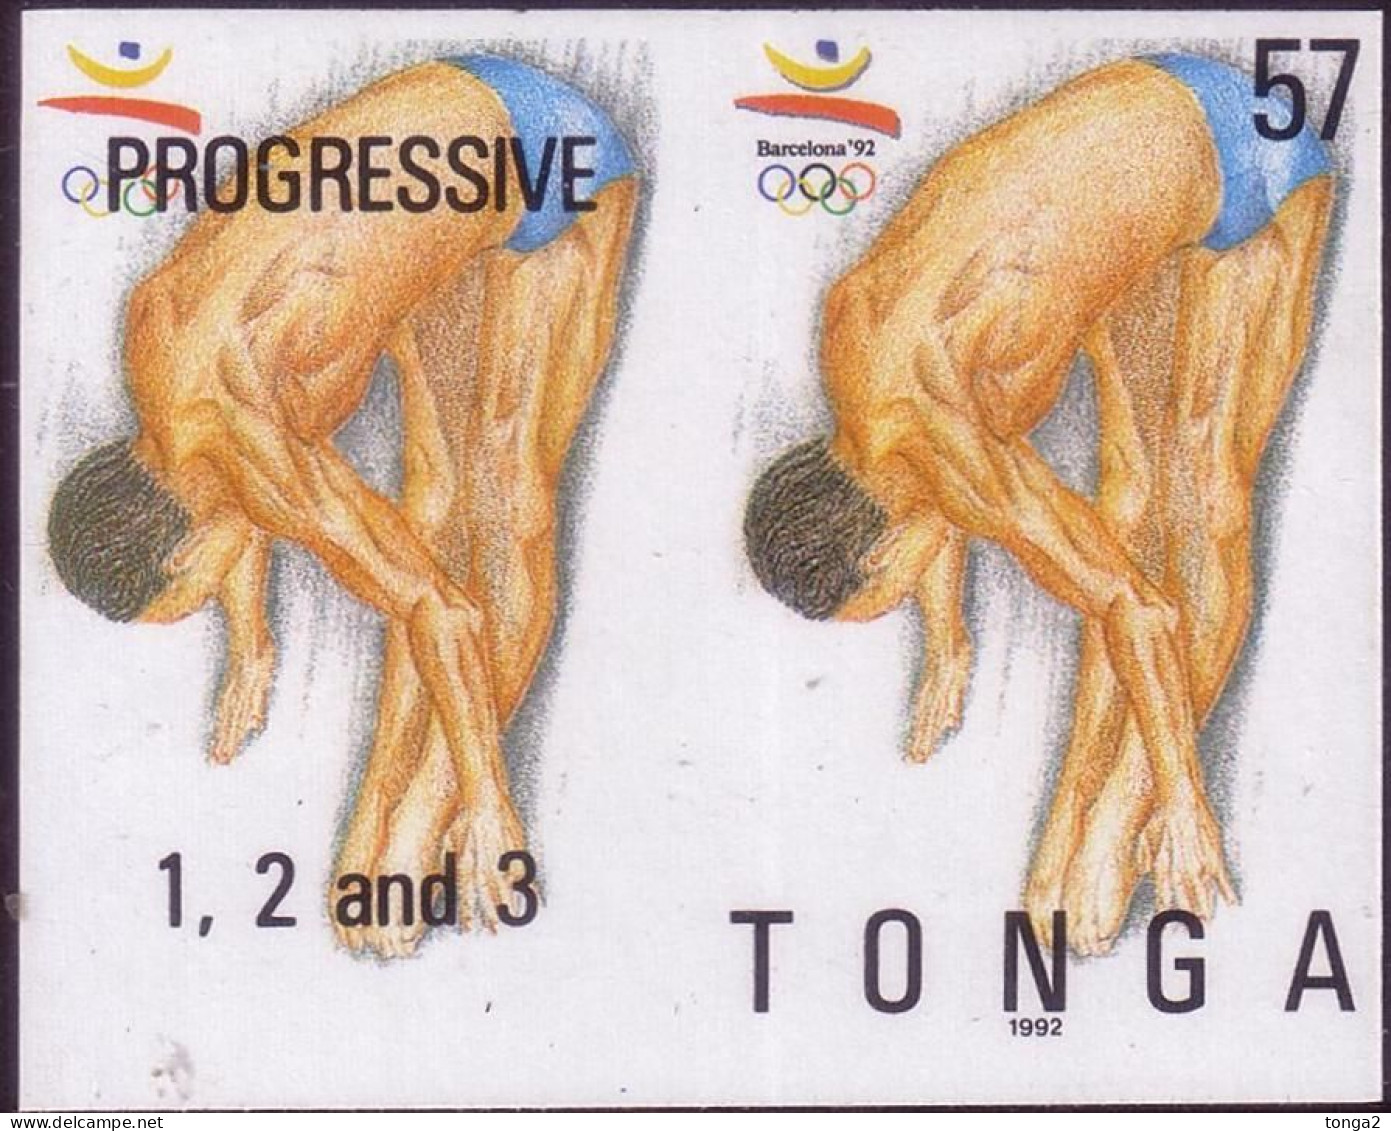 Tonga 1992 Olympic Diving -  Imperf Plate Proof Pair Showing Stage In Color Printing - Ete 1992: Barcelone